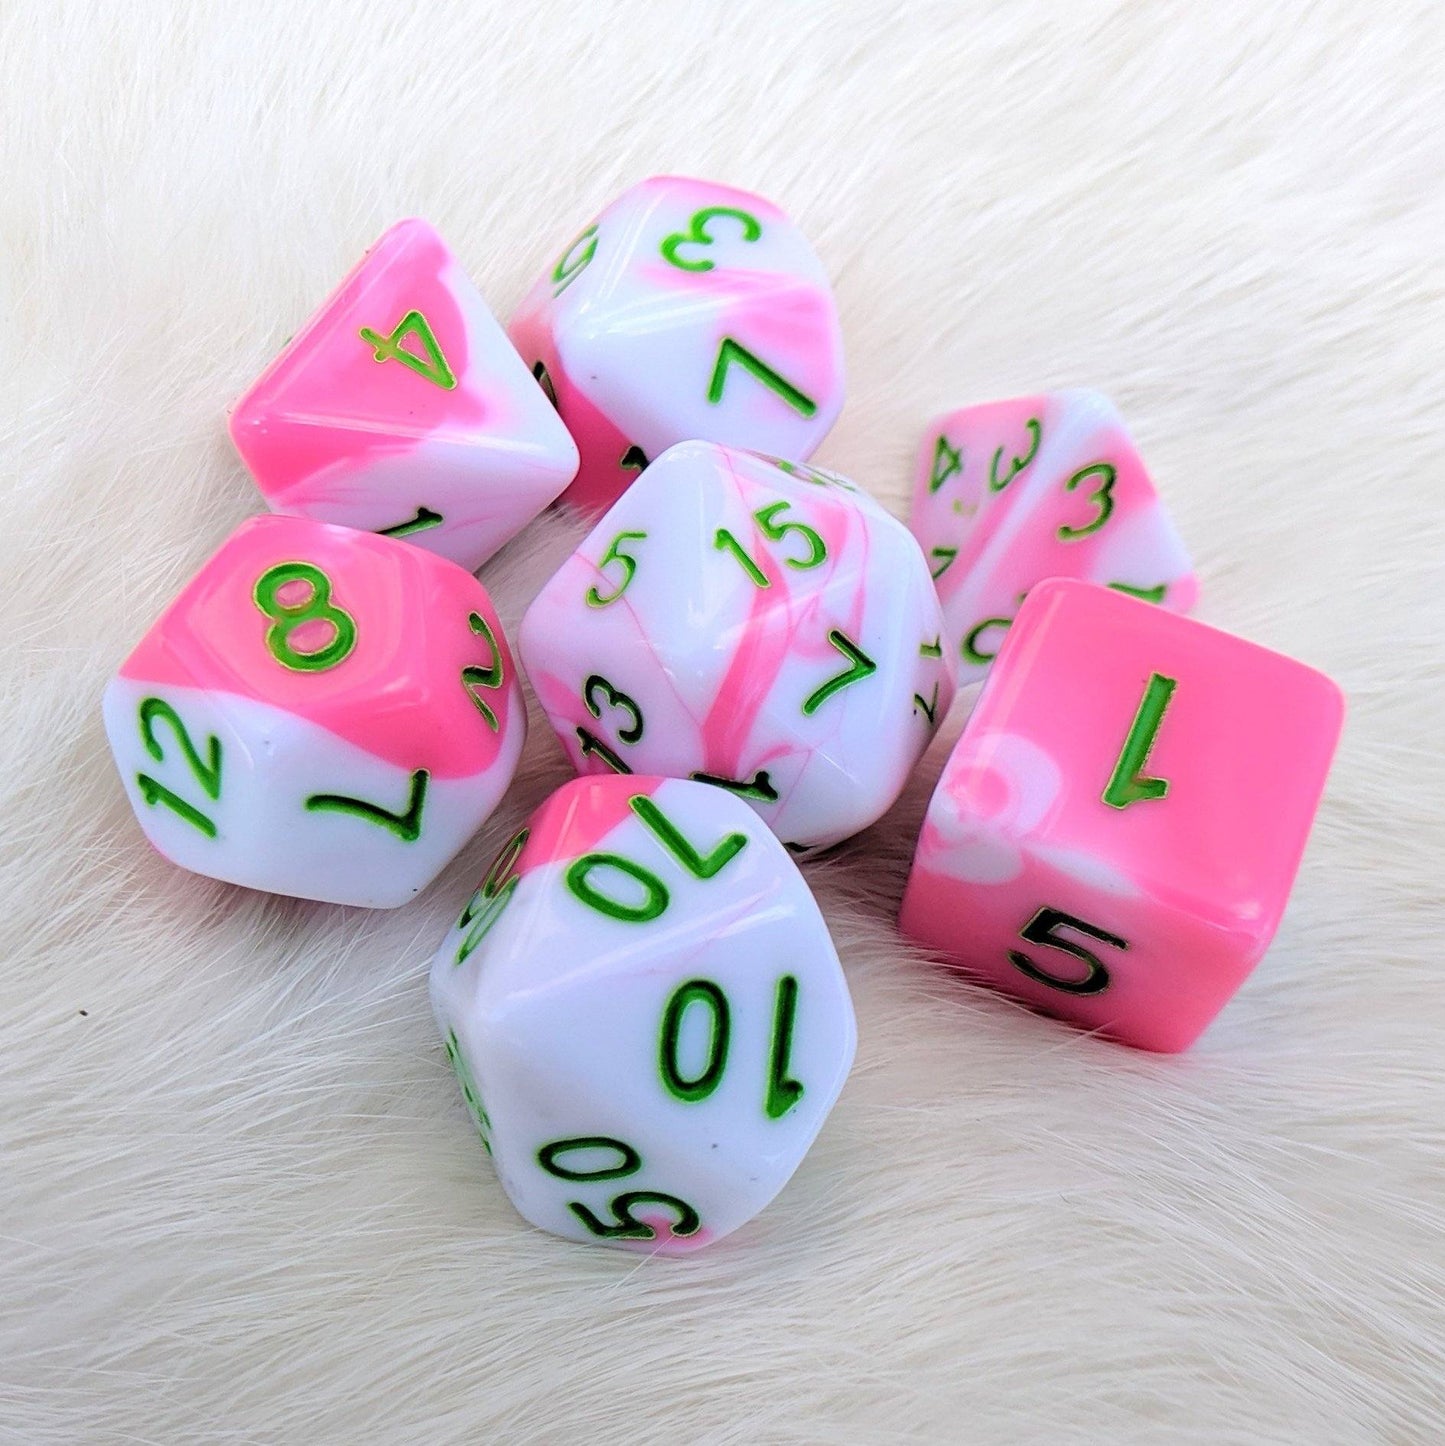 Kawaii Death Bringer DnD Dice Set, Pink and white Marble Dice - CozyGamer